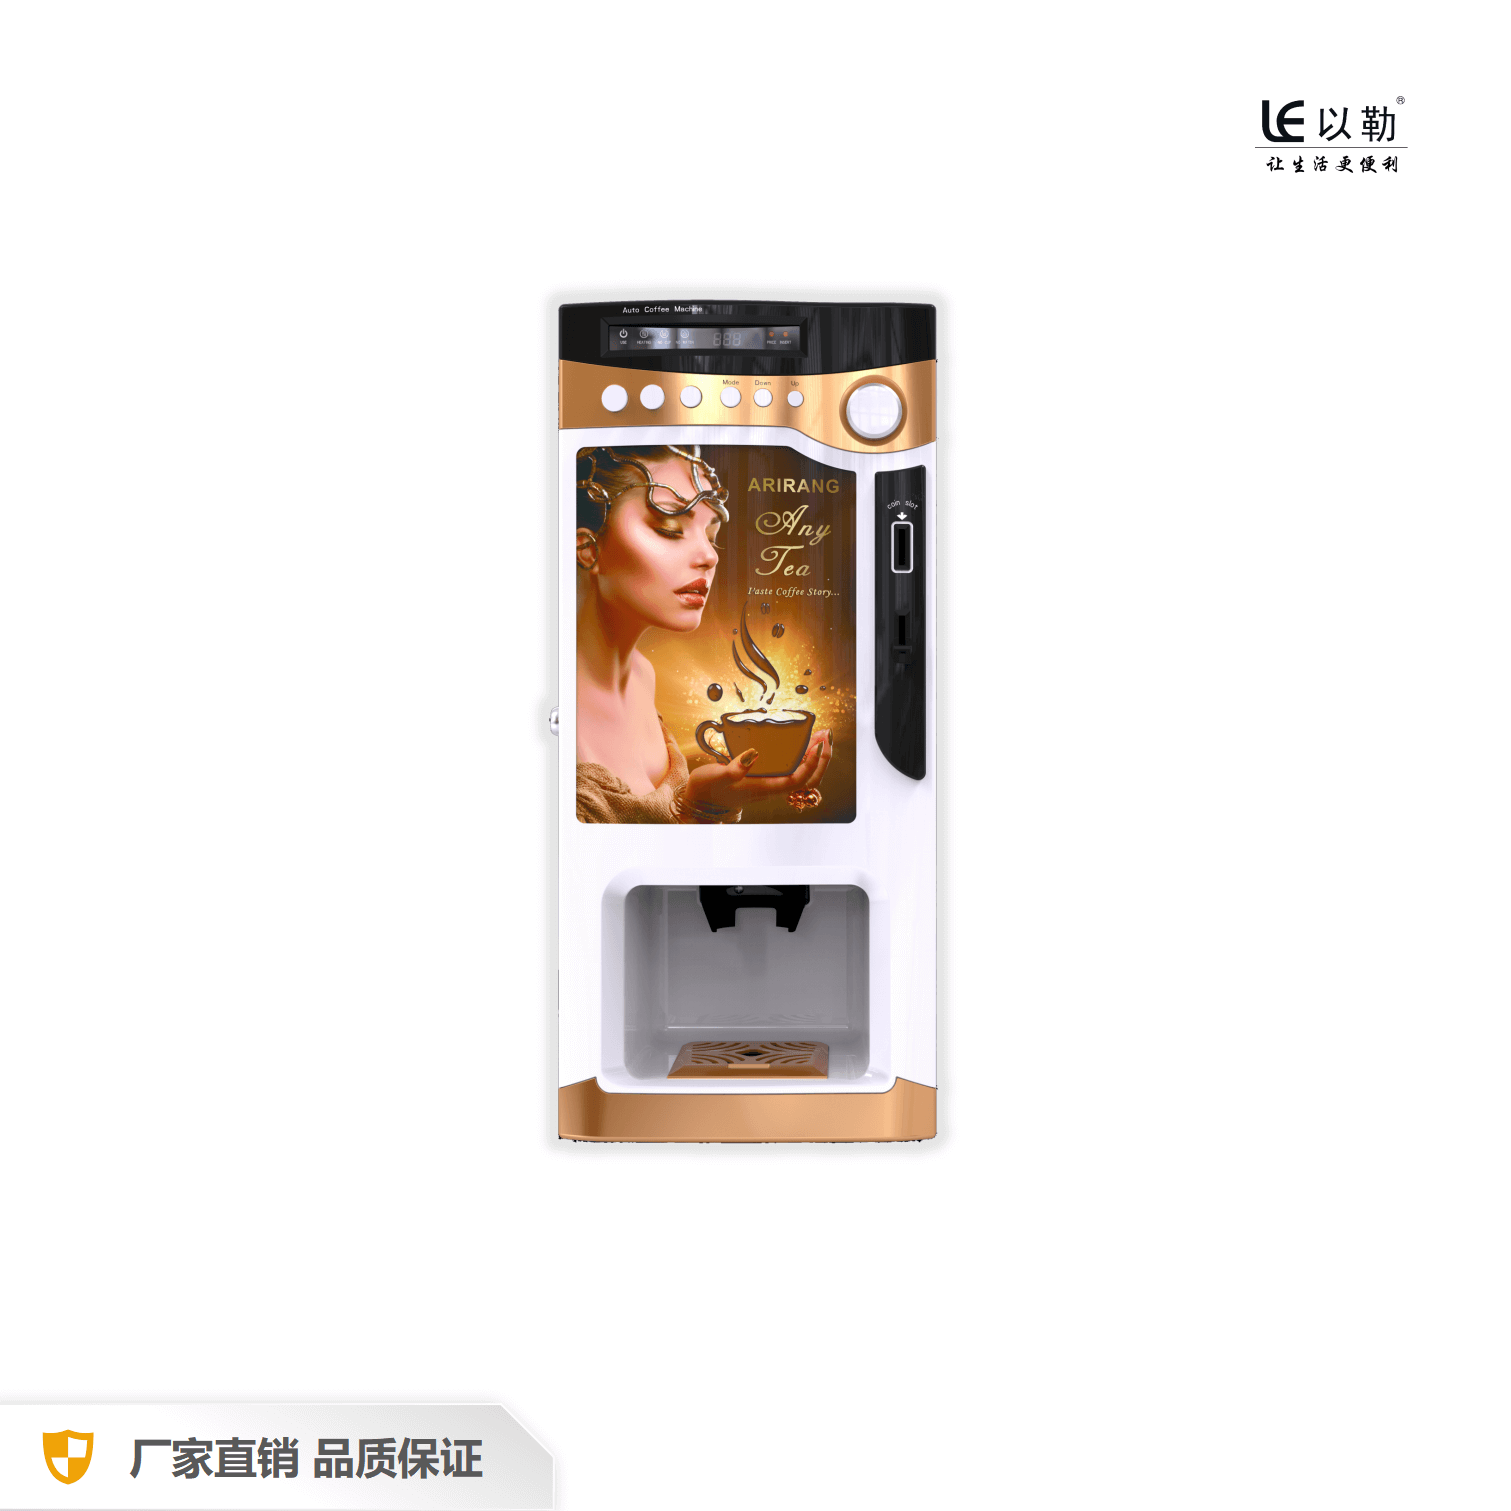 Tabletop Espresso Coffee Vending Machine With Cup Dispenser 